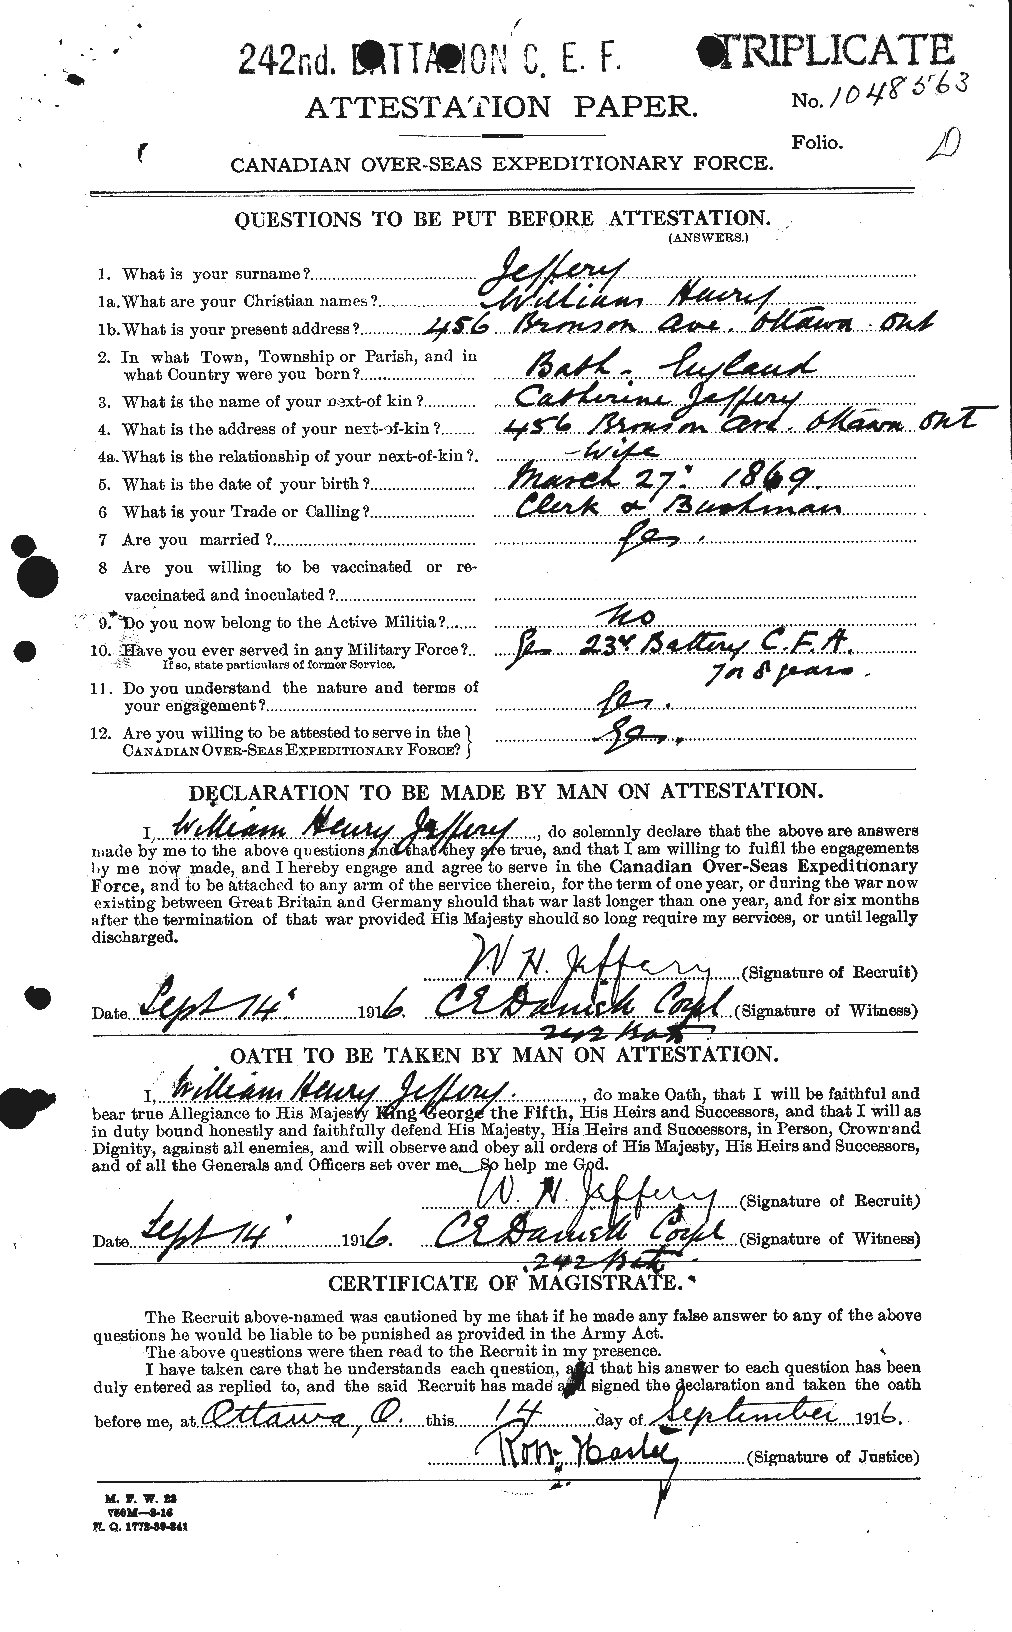 Personnel Records of the First World War - CEF 417813a